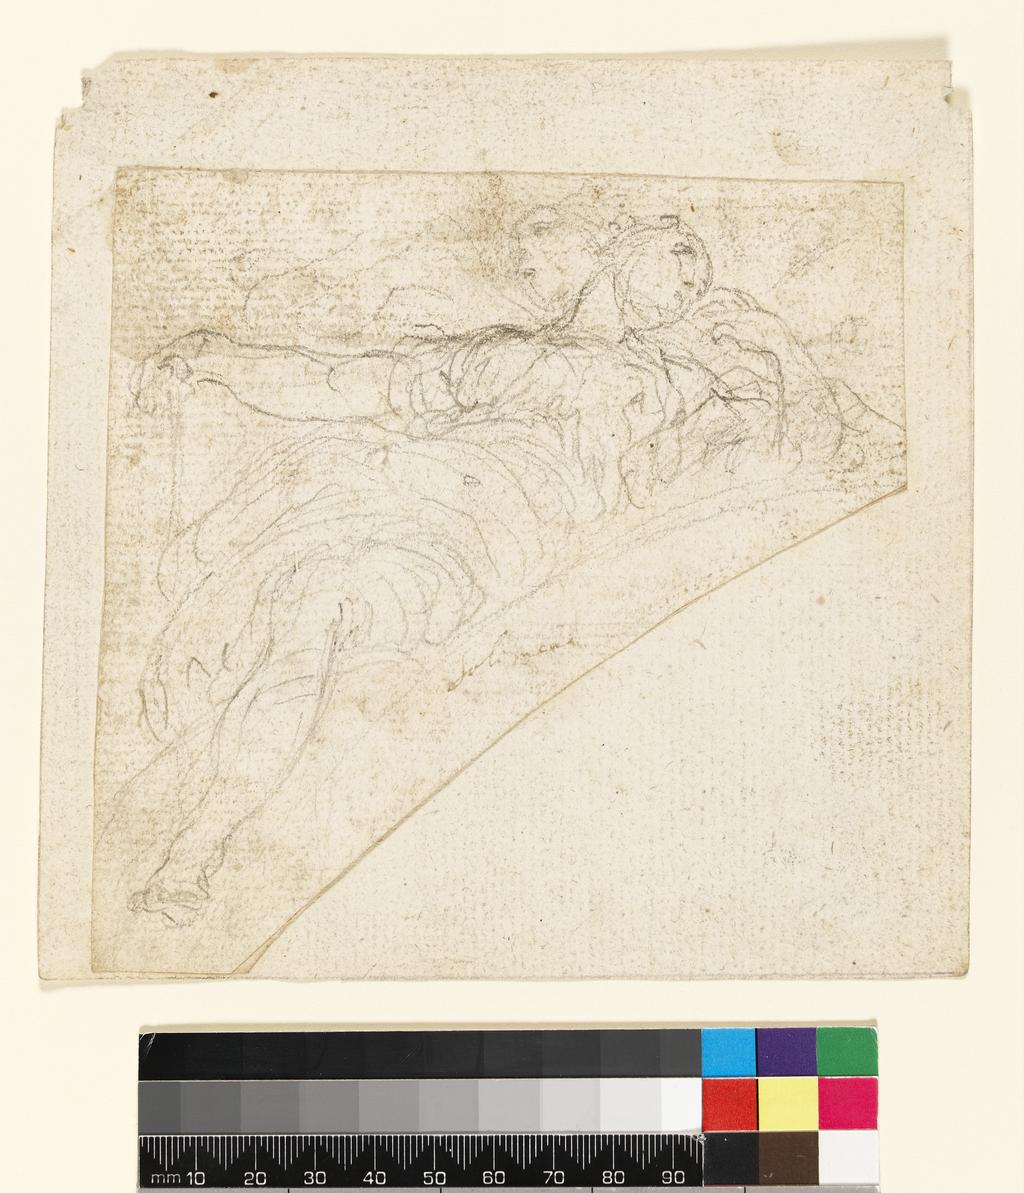 An image of Title/s: Study for a female figure in a spandrel Maker/s: Solimena, Francesco (draughtsman) [ULAN info: Italian artist, 1657-1747]Production Notes: A study for the female figure in the upper left spandrel of 'The Landing of the Ashes of St. John the Baptist at Genoa' (1715-17), formerly in the Senate, Genoa, destroyed by fire Technique Description: graphite on paper Dimensions: height: 234 mm, width: 233 mm